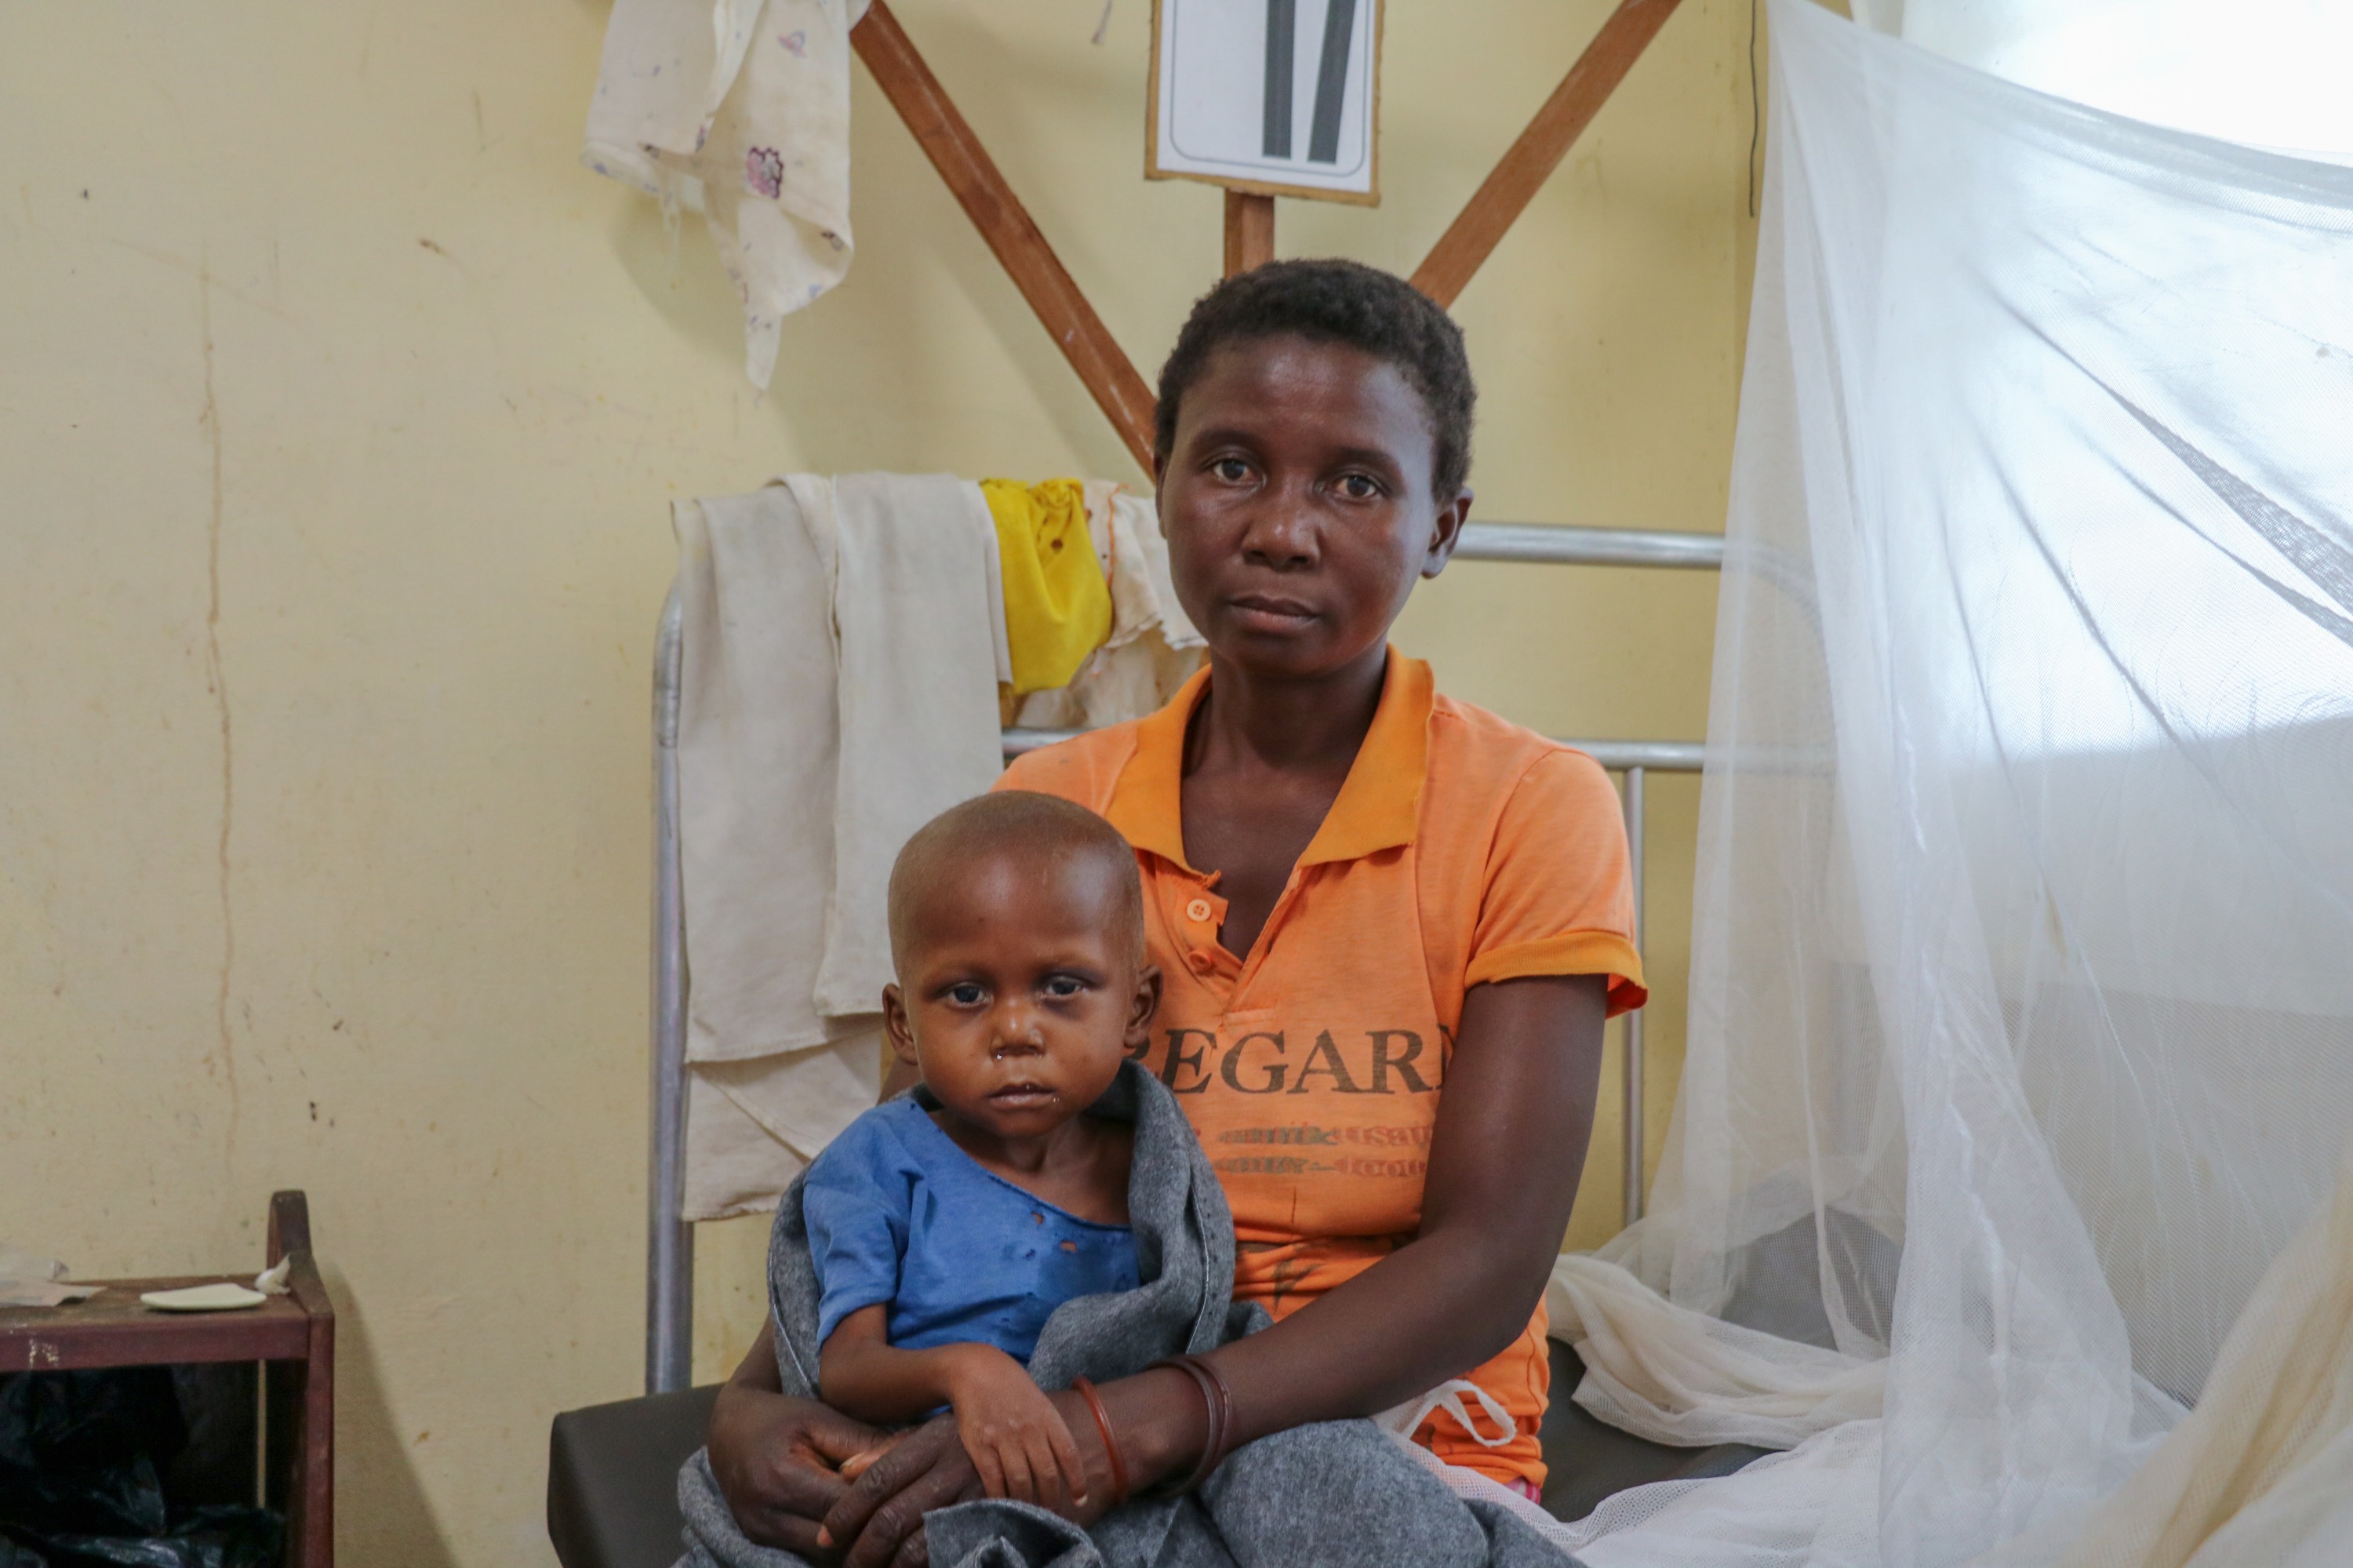 UNICEF estimates 400,000 children in Kasais are at risk of dying from malnutrition